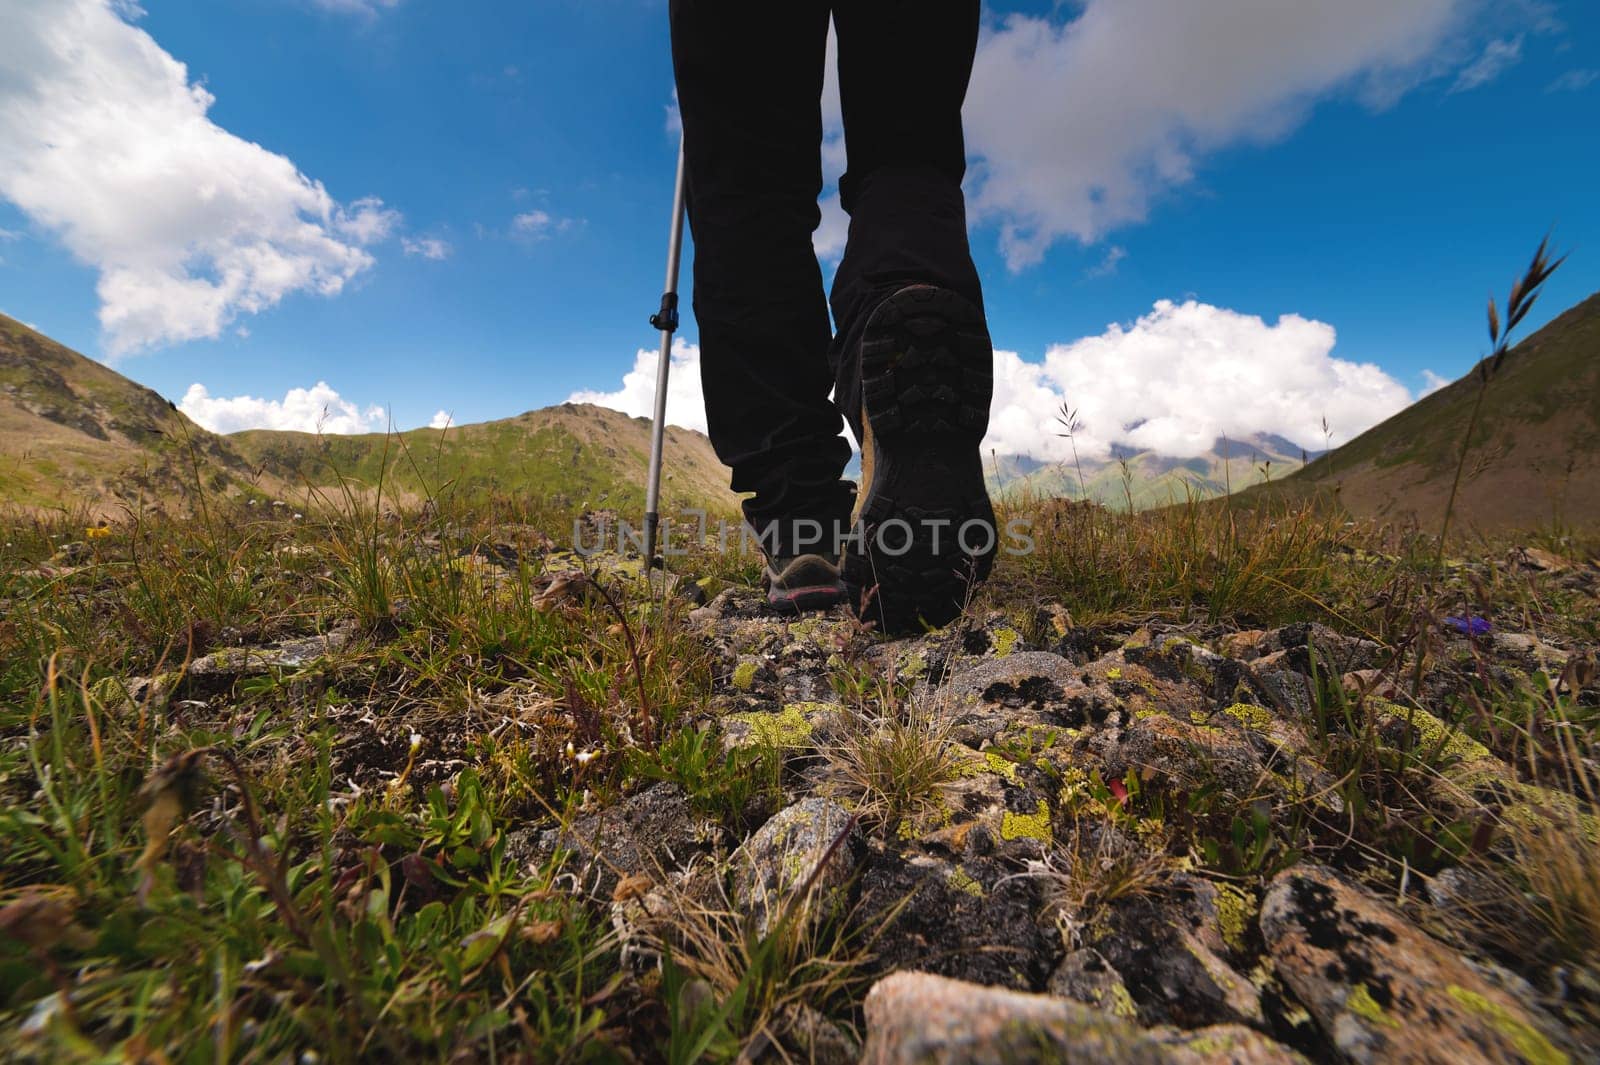 Hiking trail with flowers, green grass and stones. Close up of hiking boots in the mountains against the backdrop of mountains and fluffy clouds.